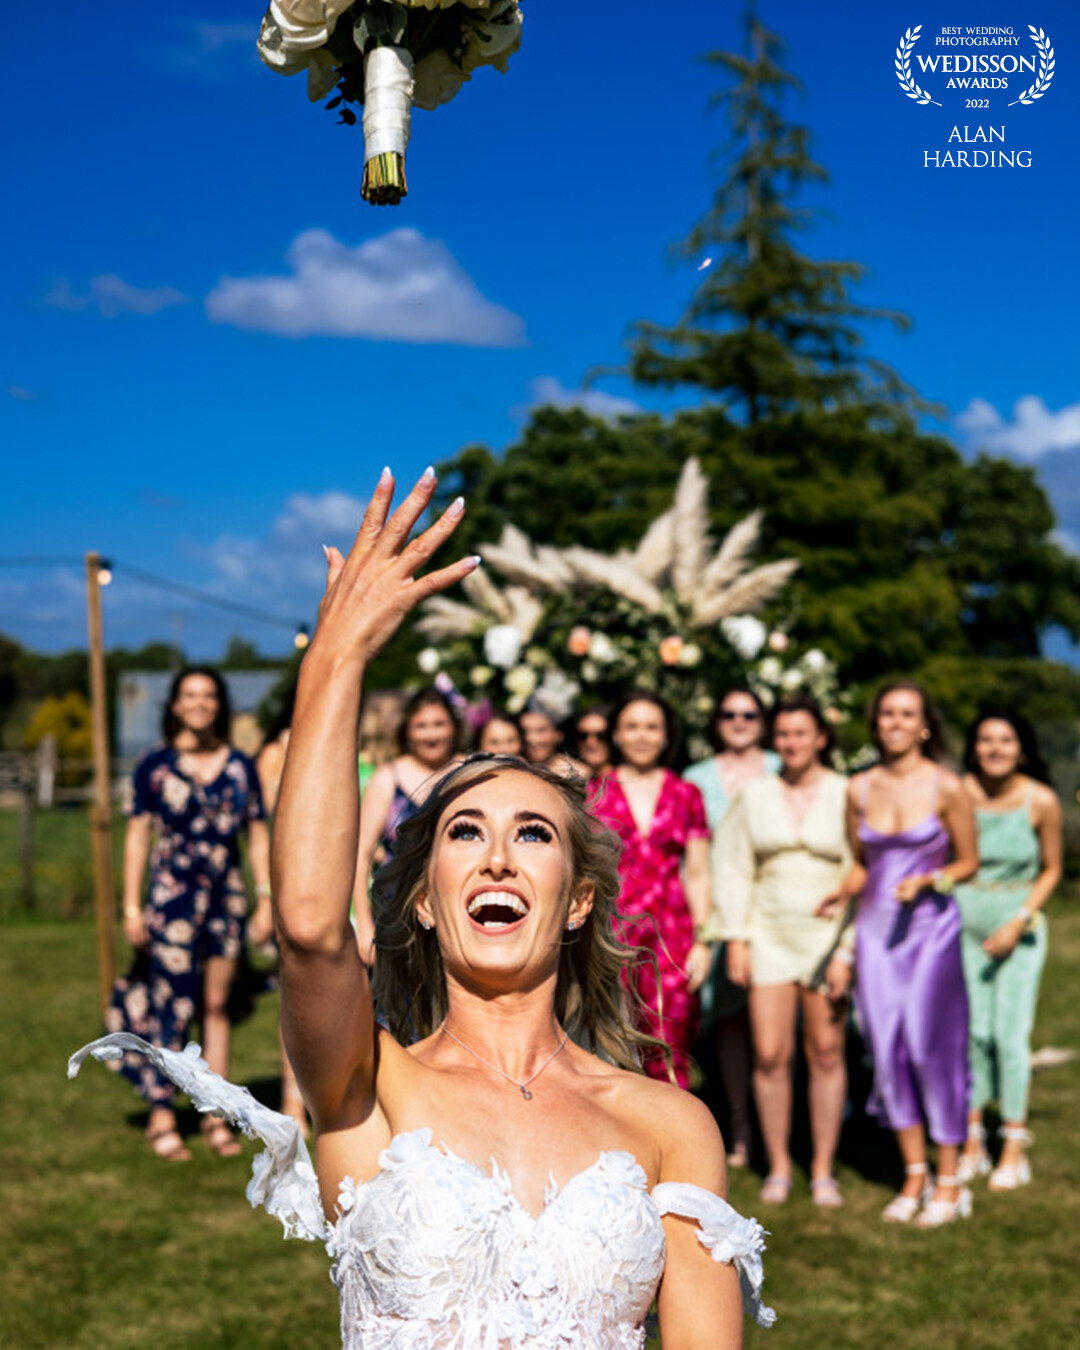 I love a bouquet shot and this one turned out great.  I'm finding they are becoming lessened less popular, although they are always fun.  This shot really worked for me and all the bridesmaids were really up for it.